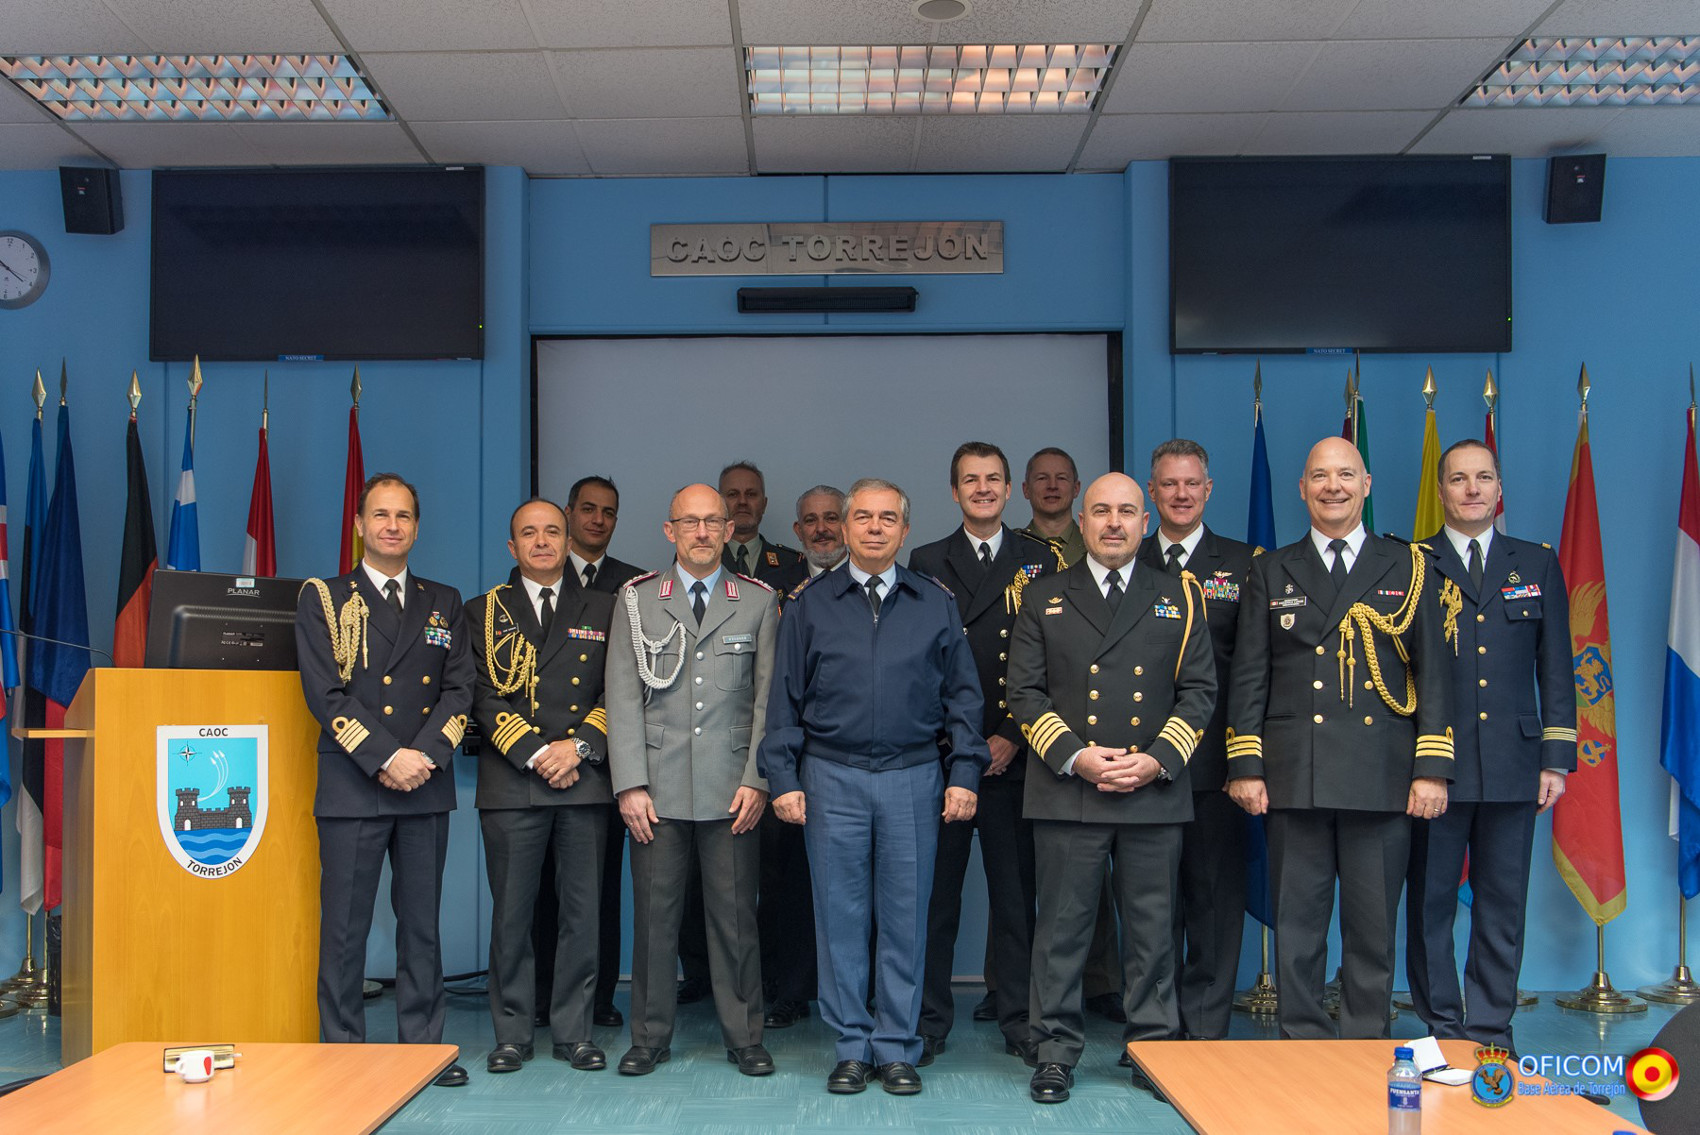 Defence attachés from NATO member countries visit the Combined Air Operations Centre in Torrejón